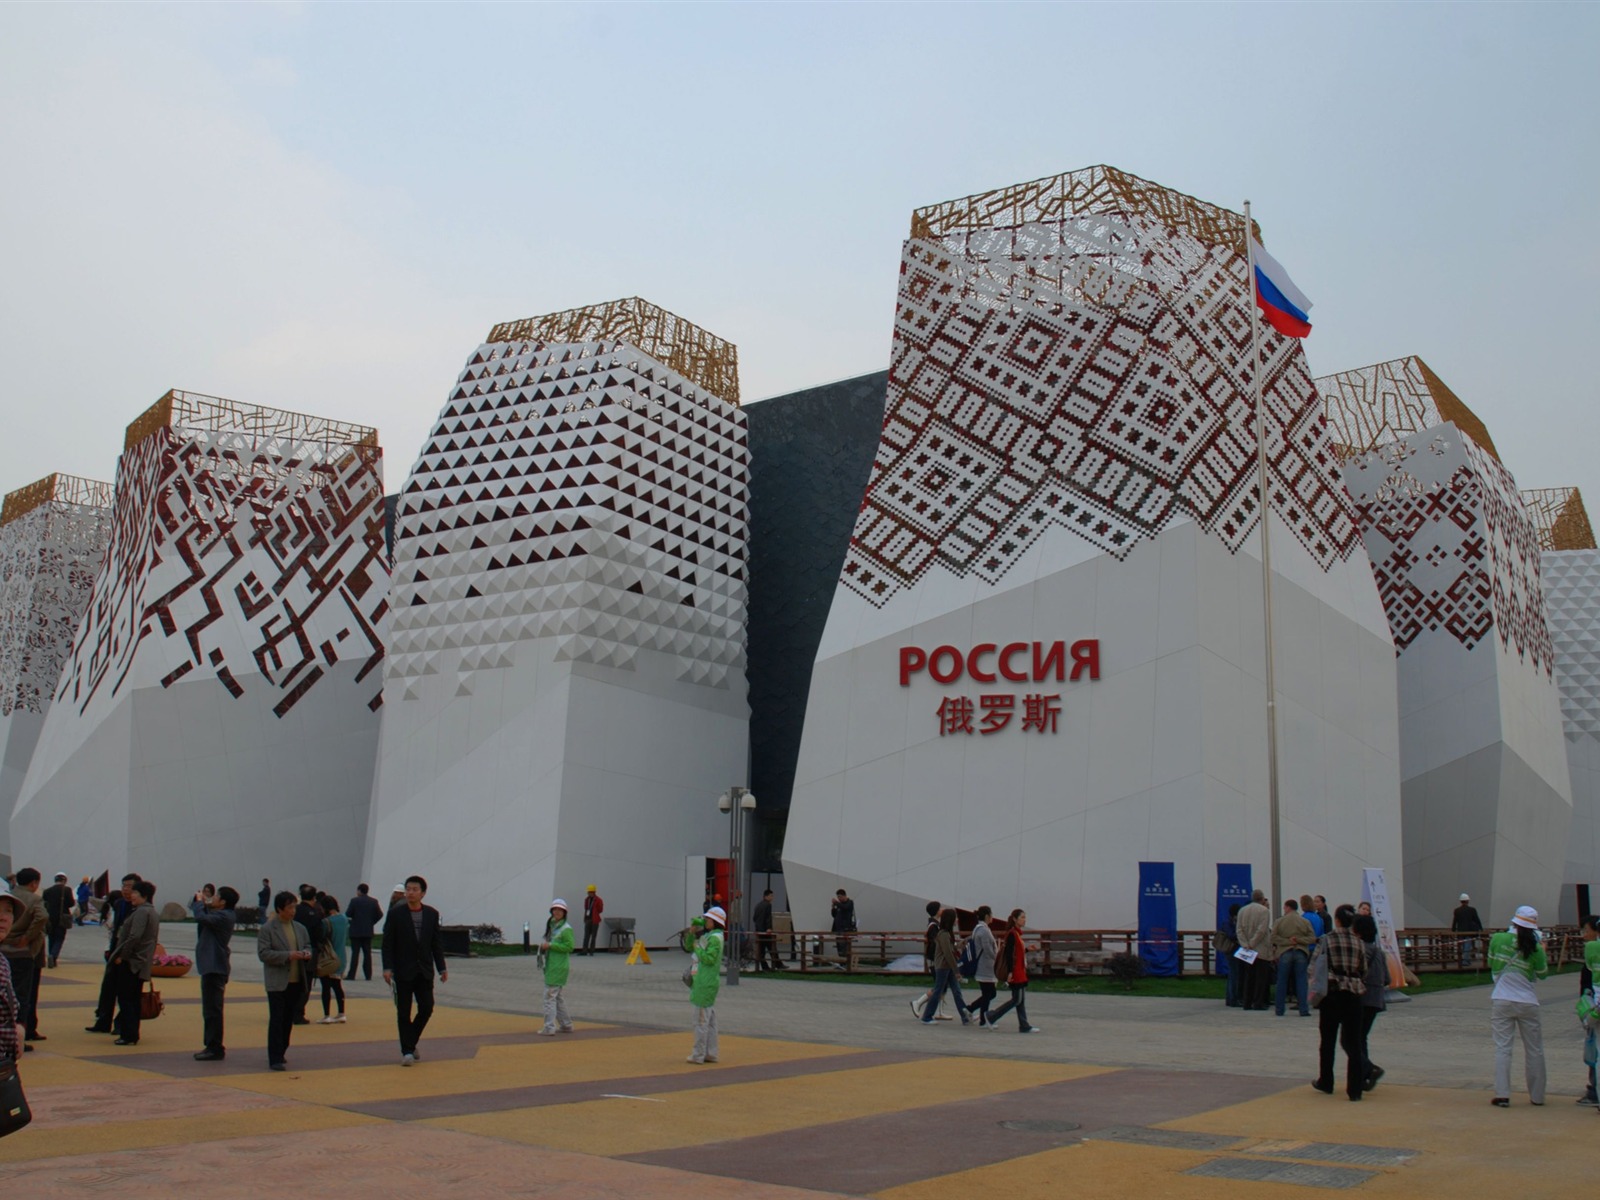 Commissioning of the 2010 Shanghai World Expo (studious works) #20 - 1600x1200